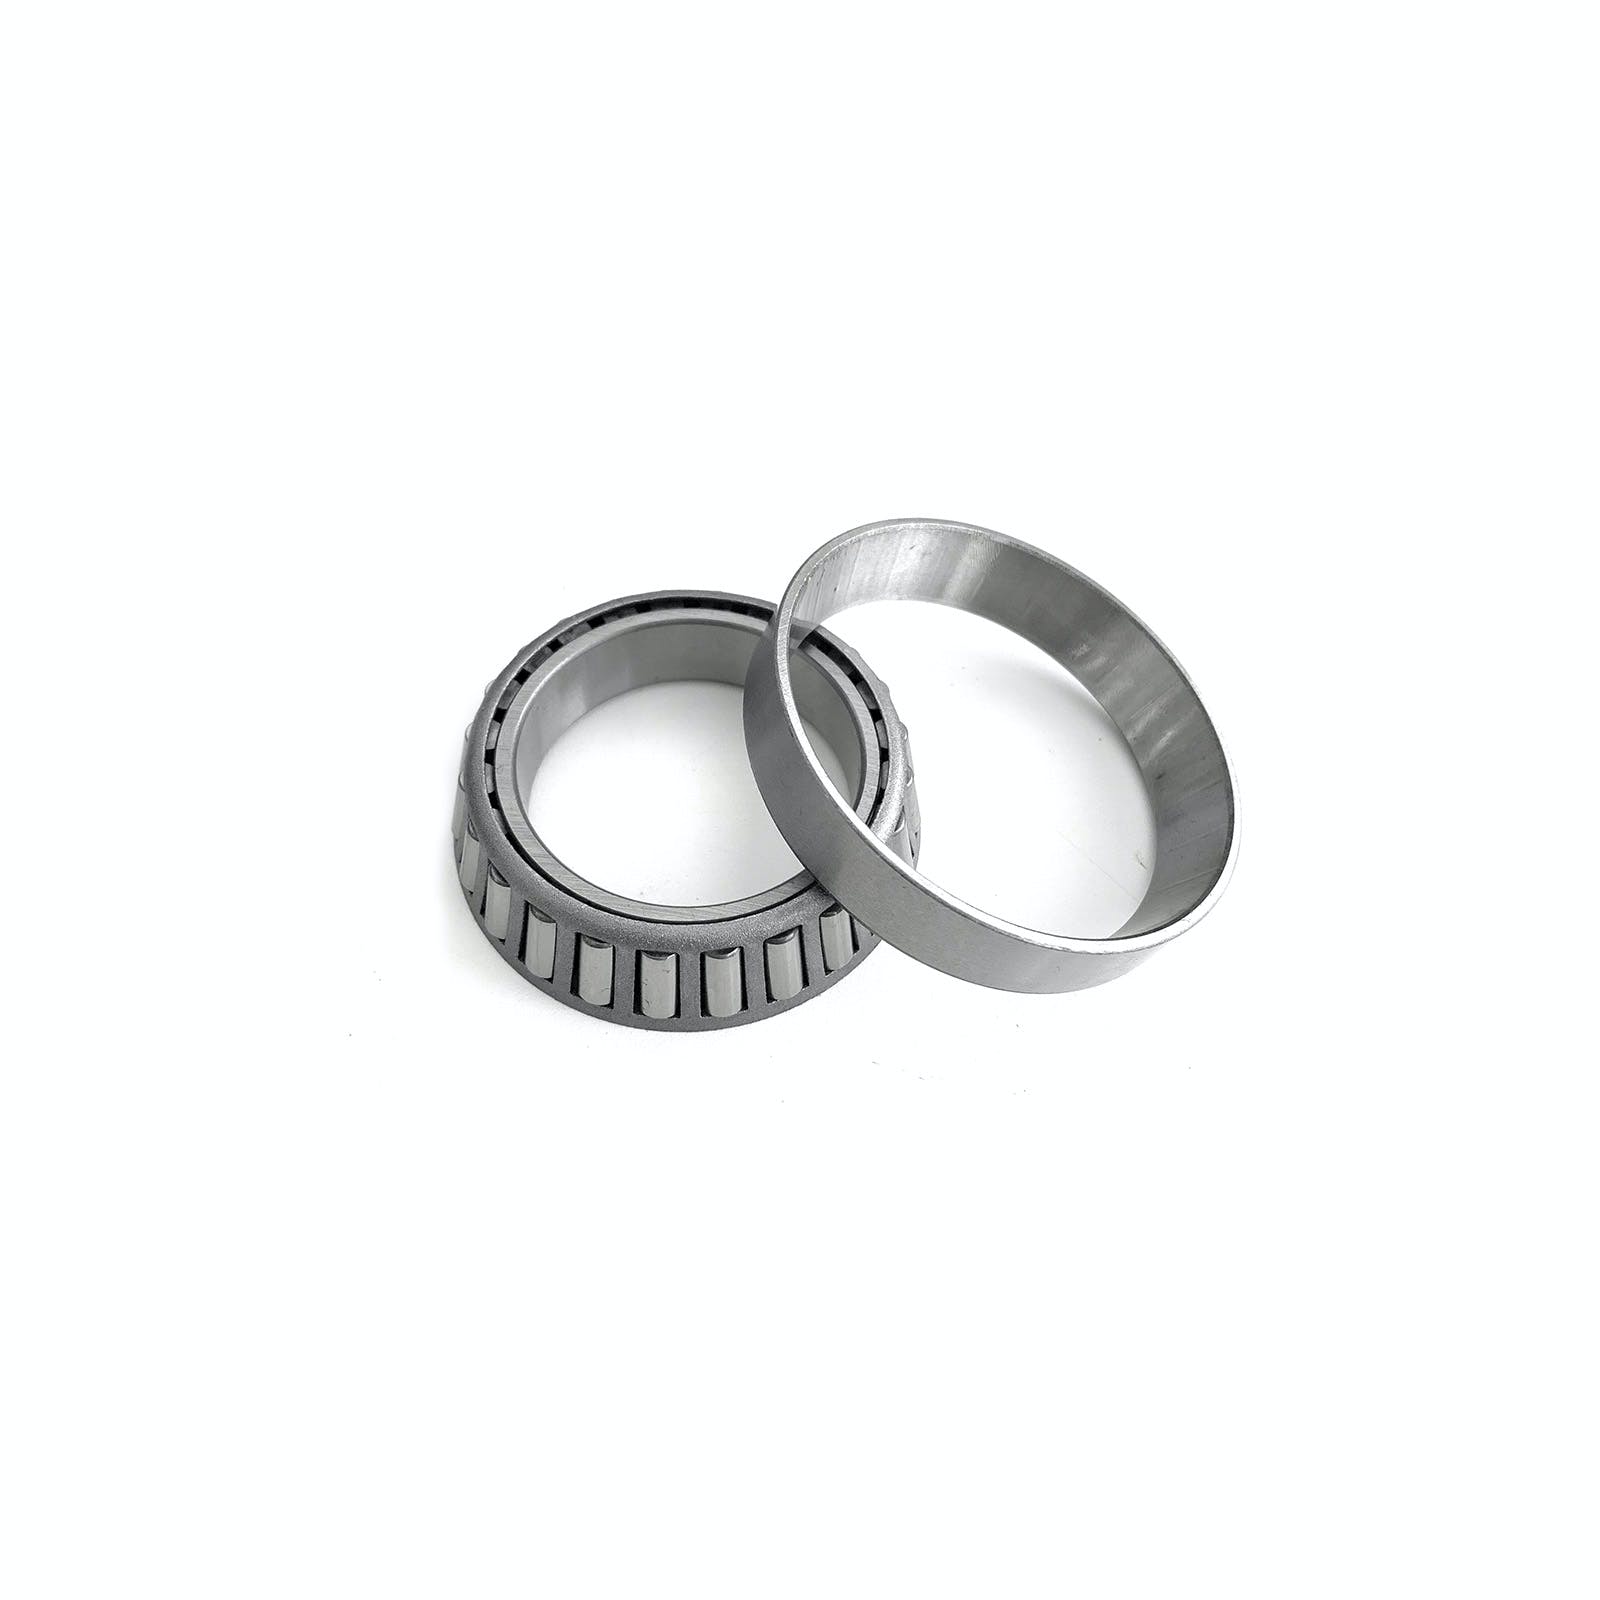 Speedmaster PCE203.1005 9 Conversion Carrier Bearings to suit 35 Spline into 3.062 Case